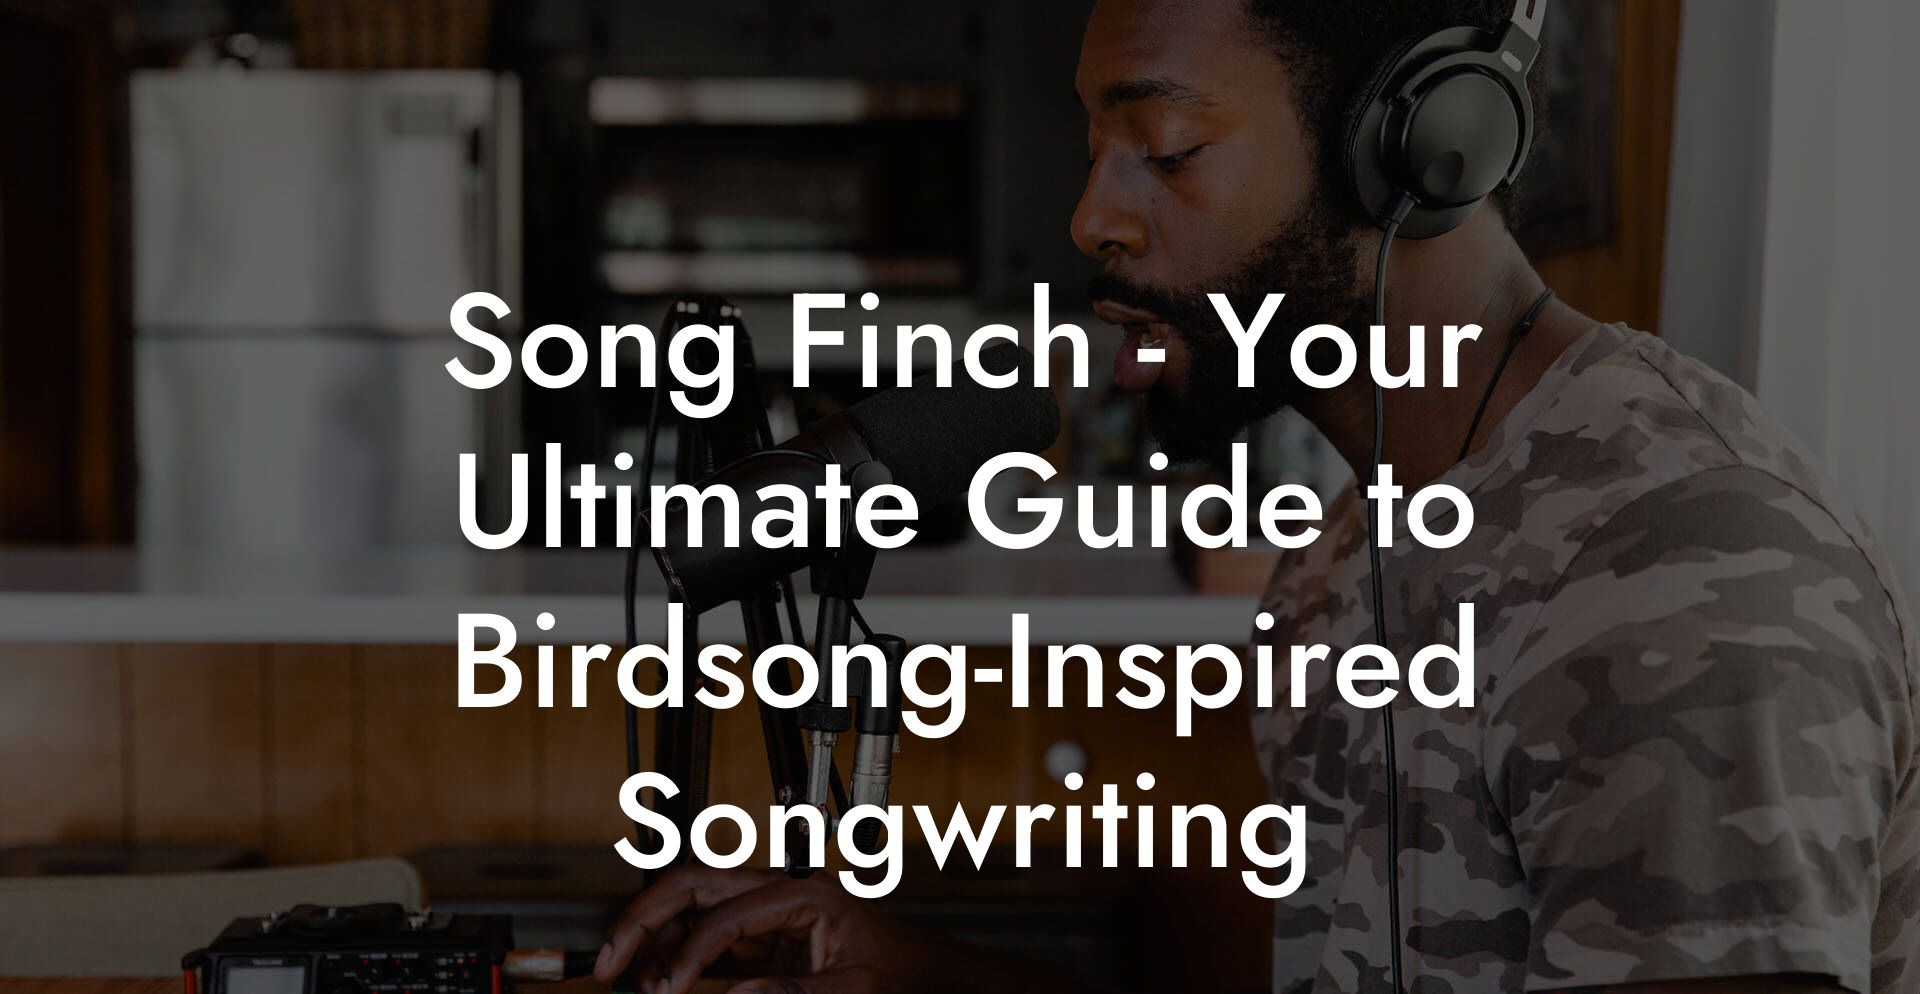 song finch your ultimate guide to birdsonginspired songwriting lyric assistant